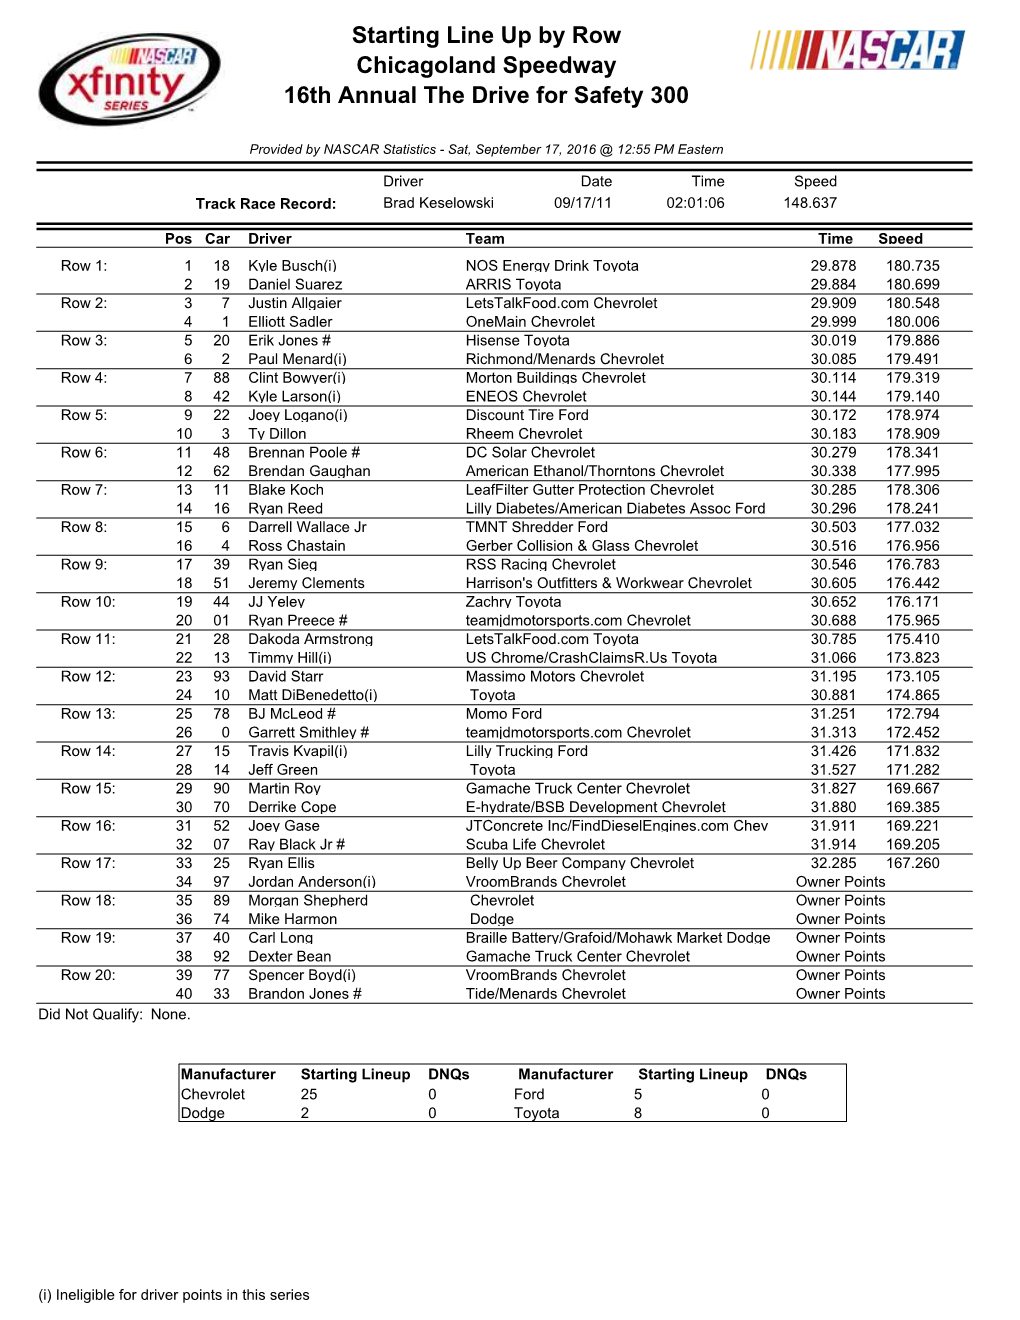 Starting Line up by Row Chicagoland Speedway 16Th Annual the Drive for Safety 300